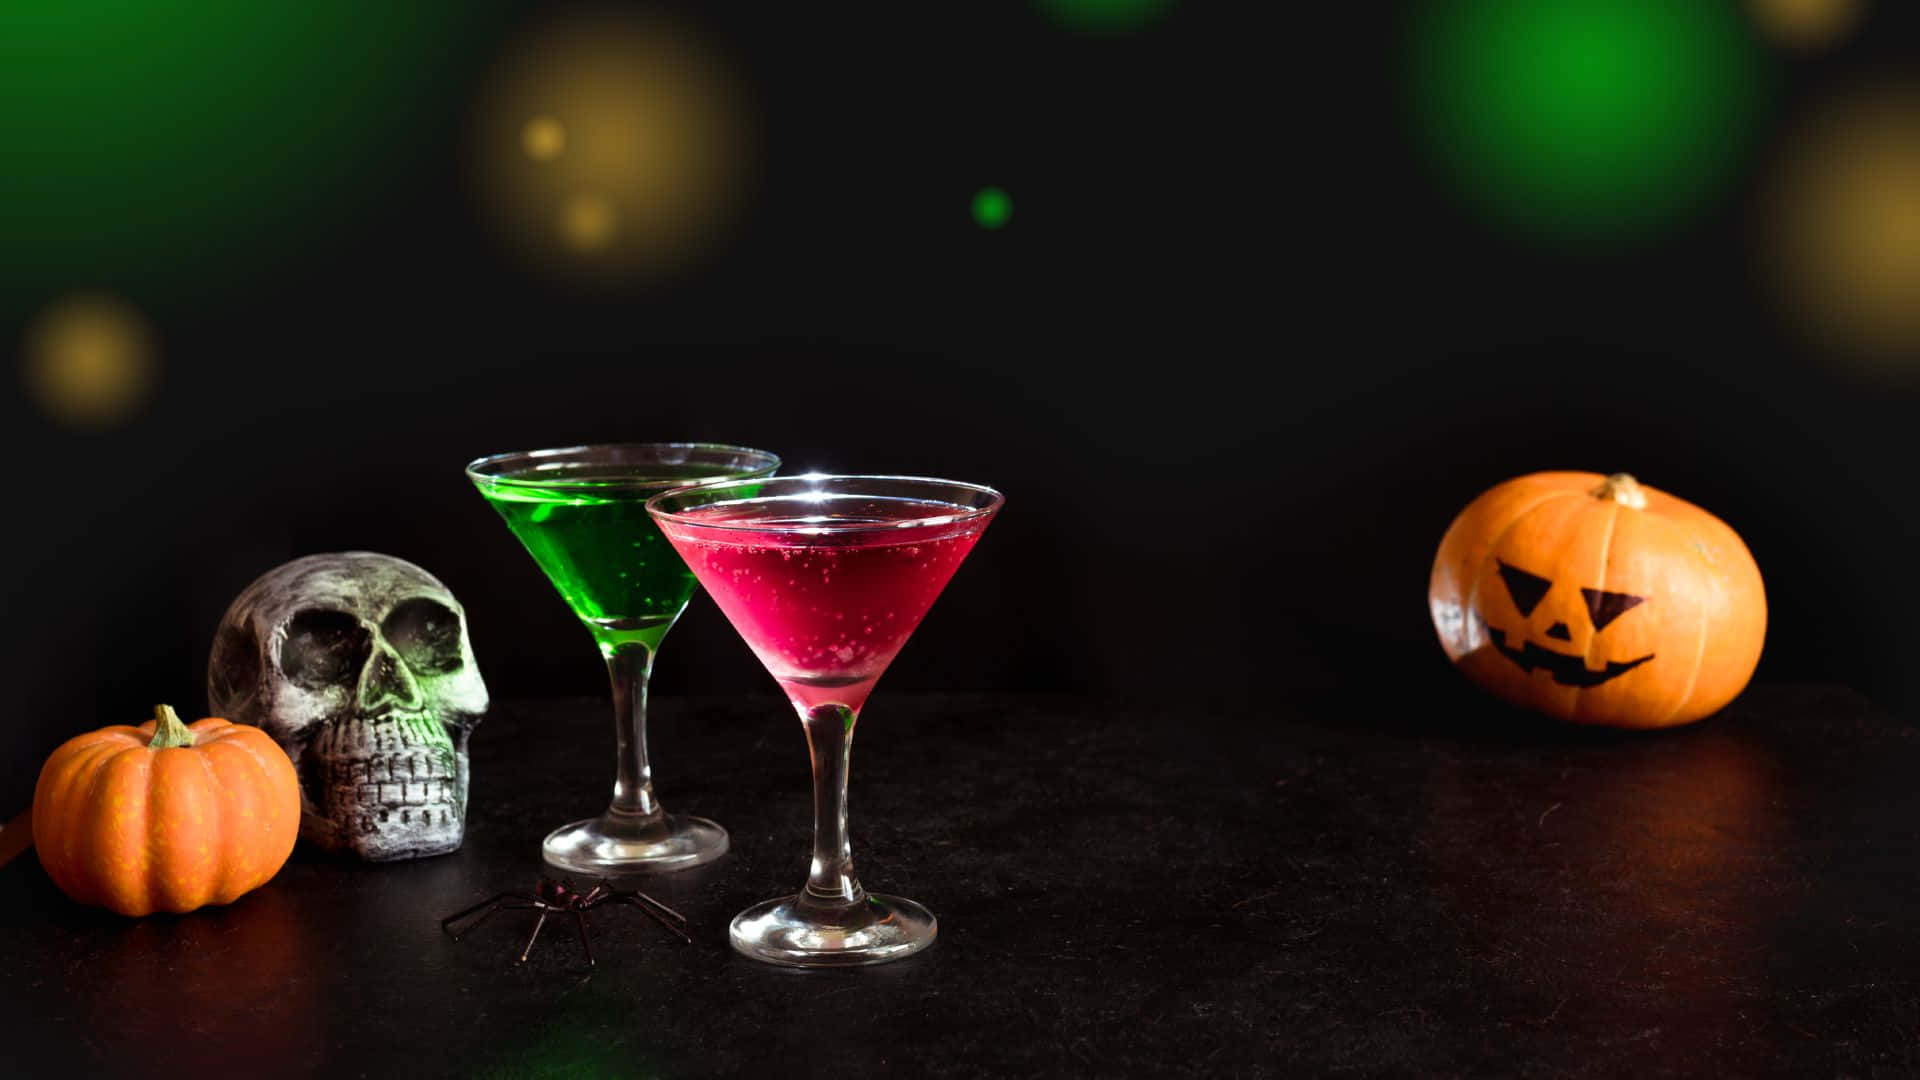 “Treat yourself to some spooky cocktails this Halloween!” Wallpaper